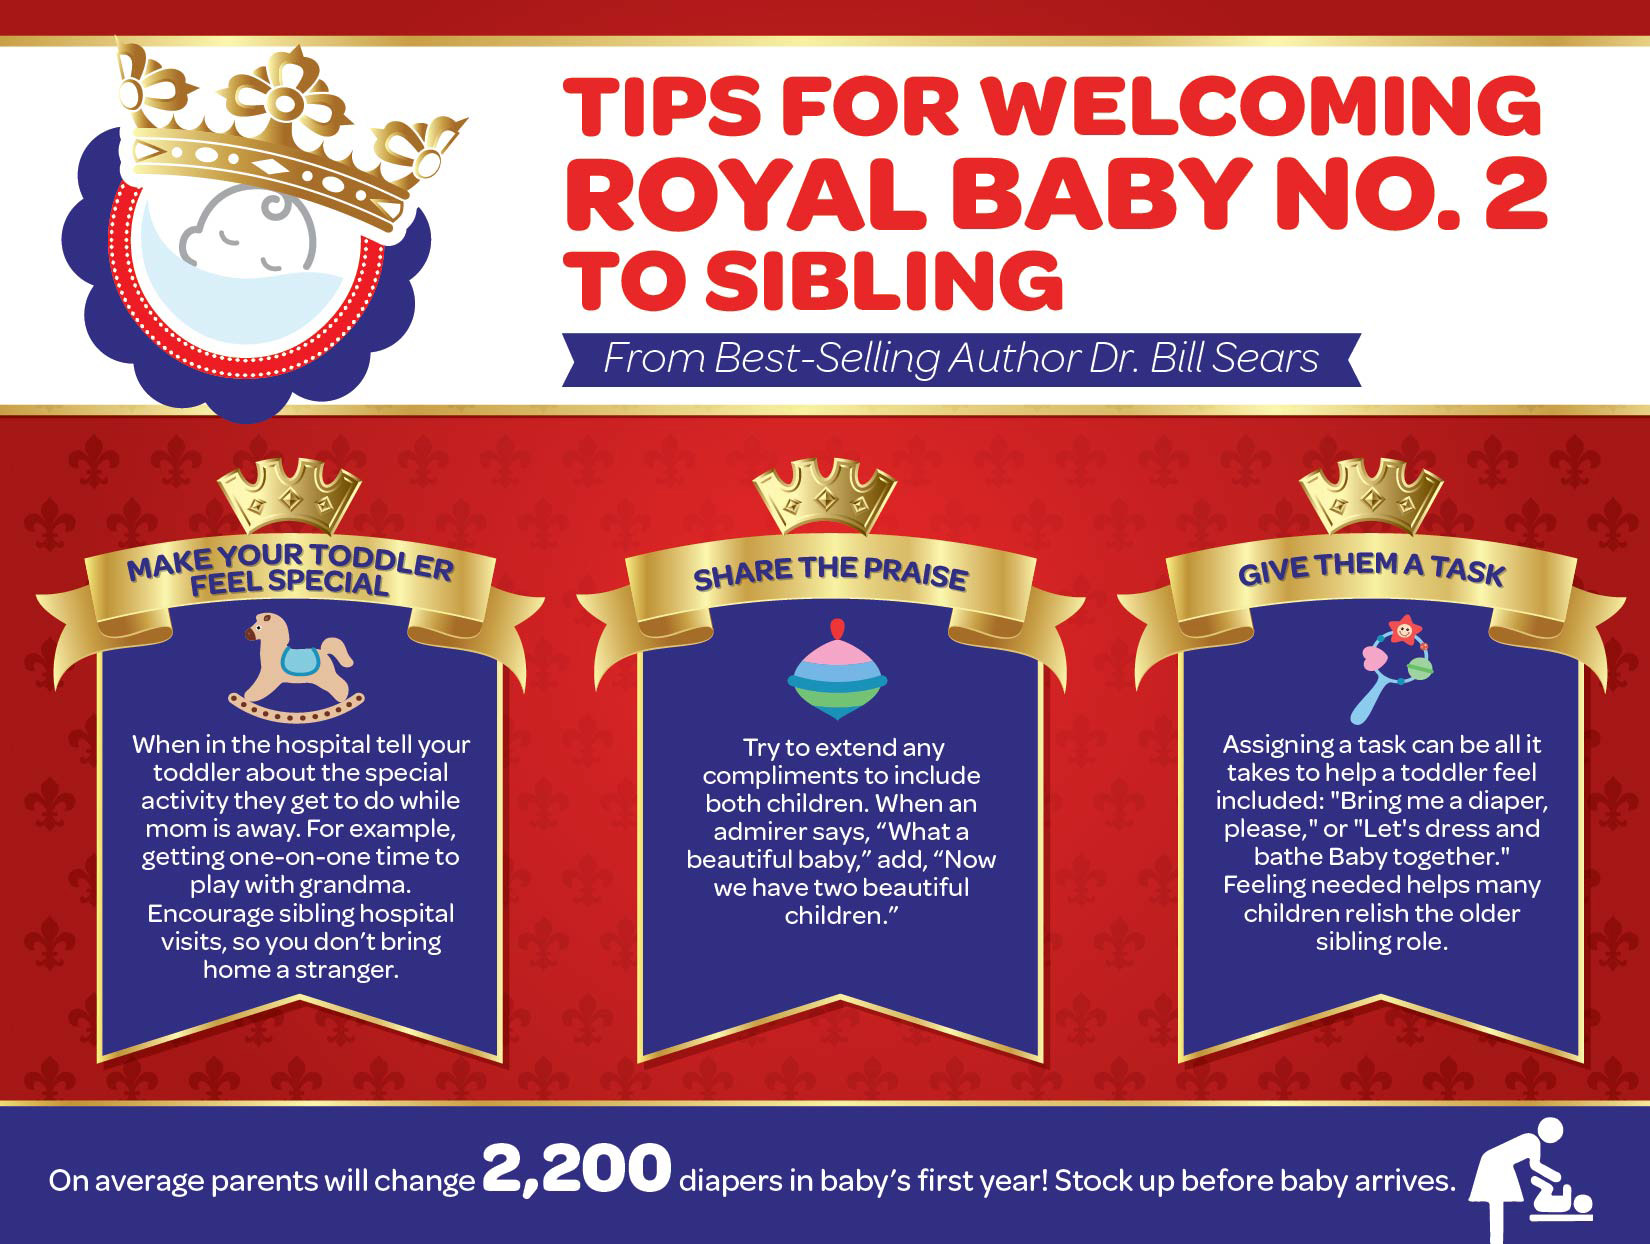 Tips to Bring Home Baby No. 2